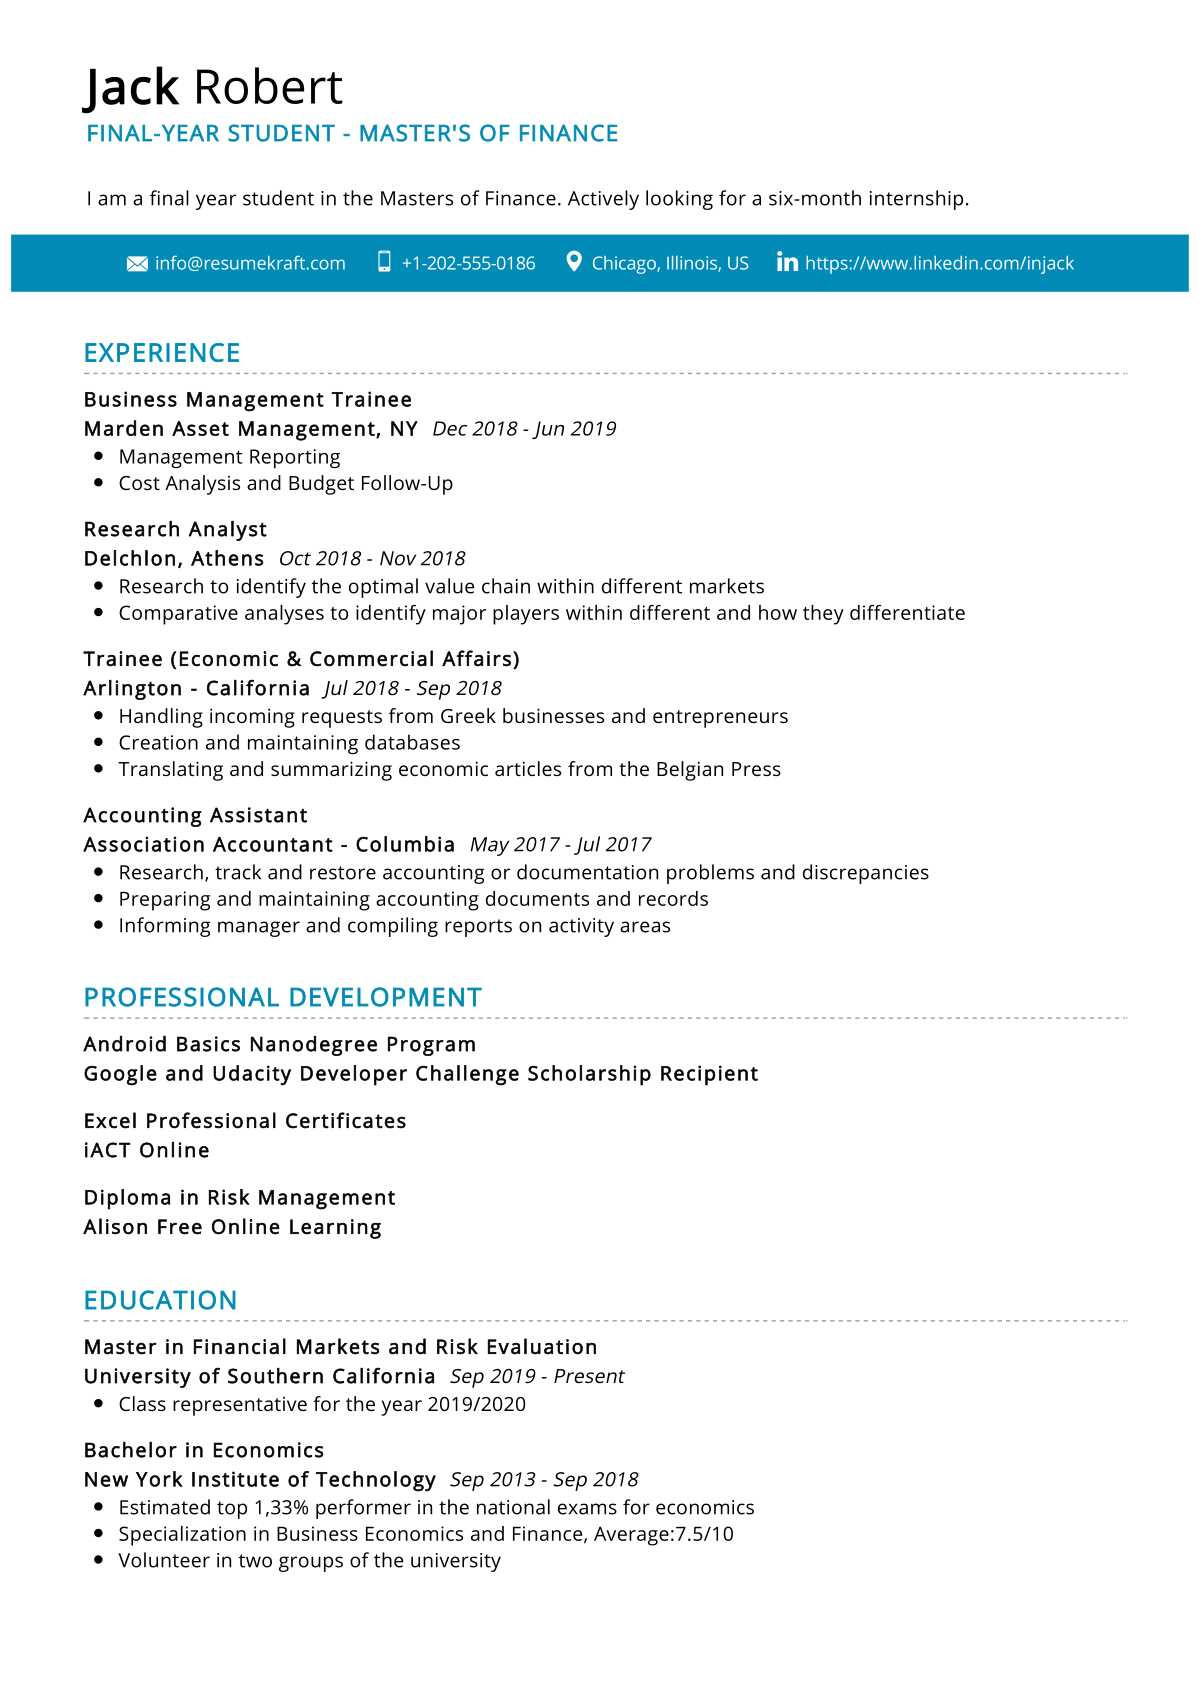 Resume Summary Samples for College Students Final-year Student Resume Example 2022 Writing Tips – Resumekraft